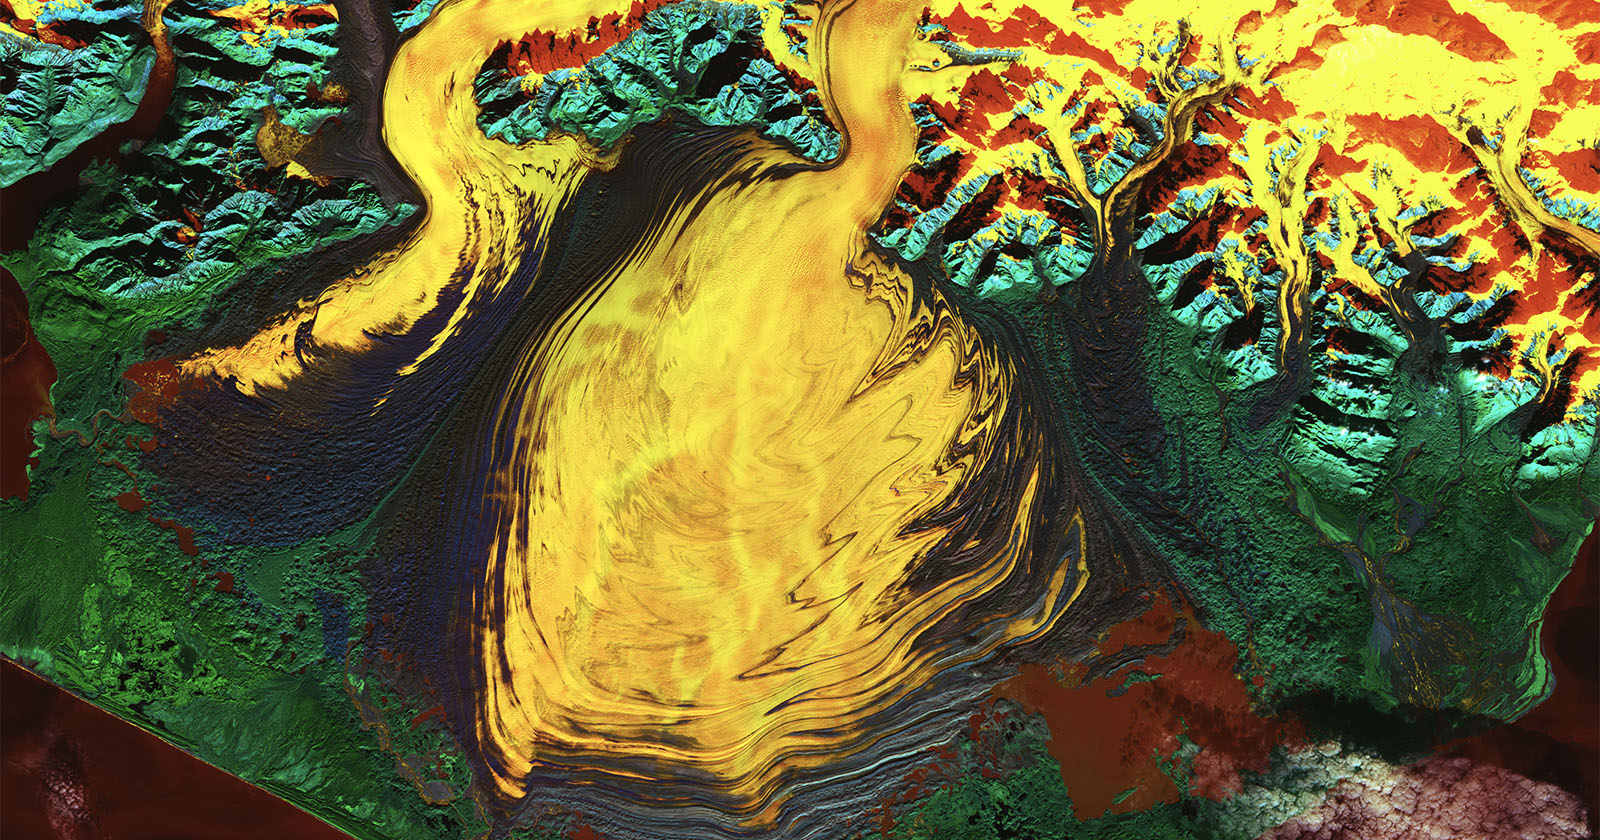 Satellite image of Malaspina Glacier in Alaska shows the formation in bright yellow.